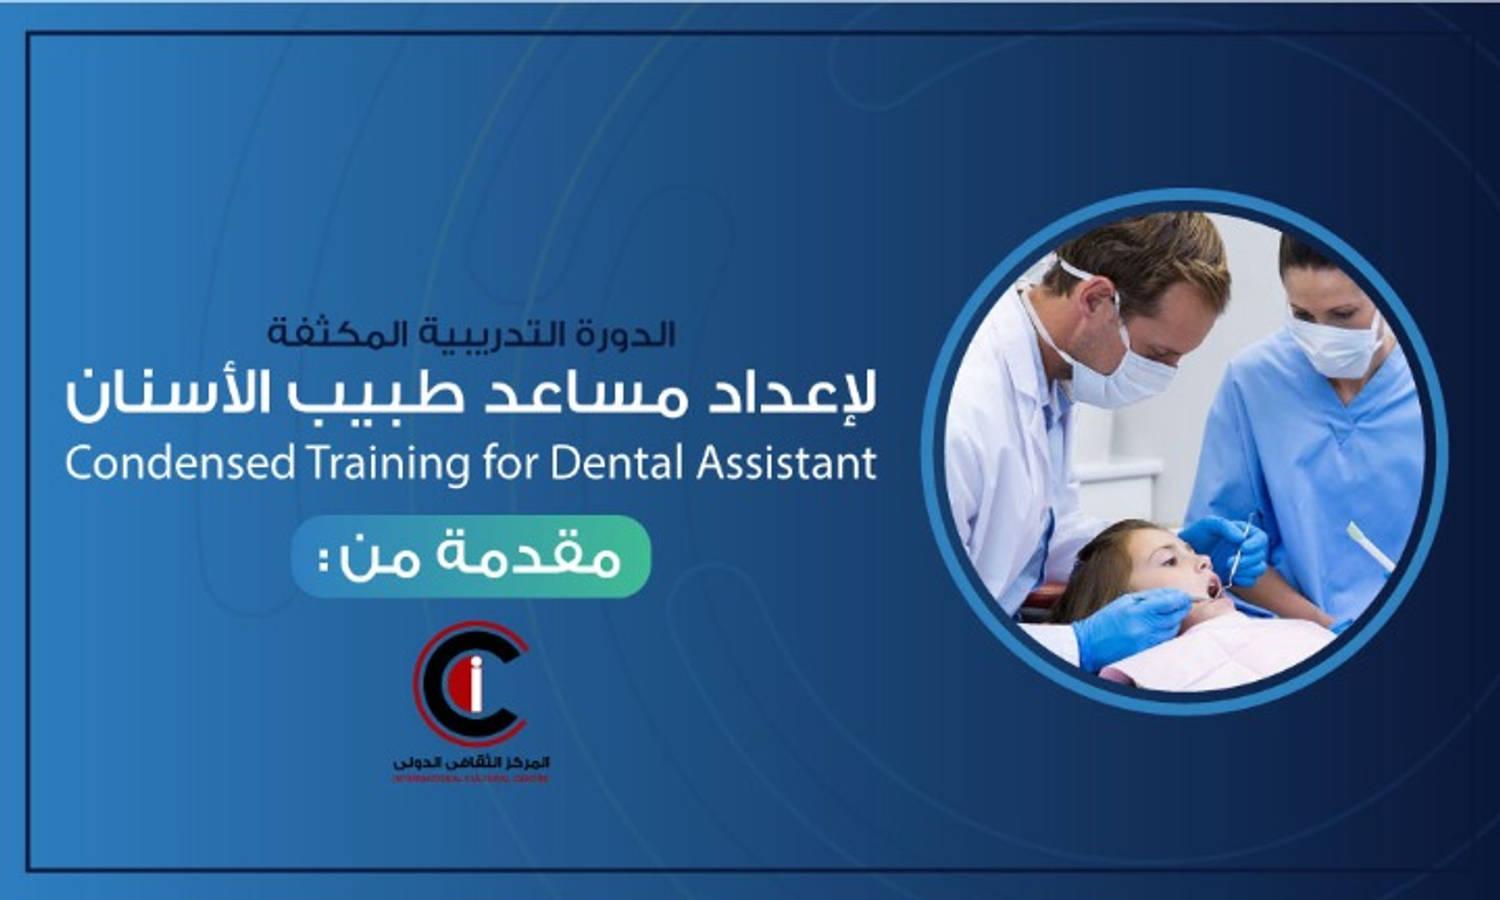 Condensed Training Course for Dental Assistant